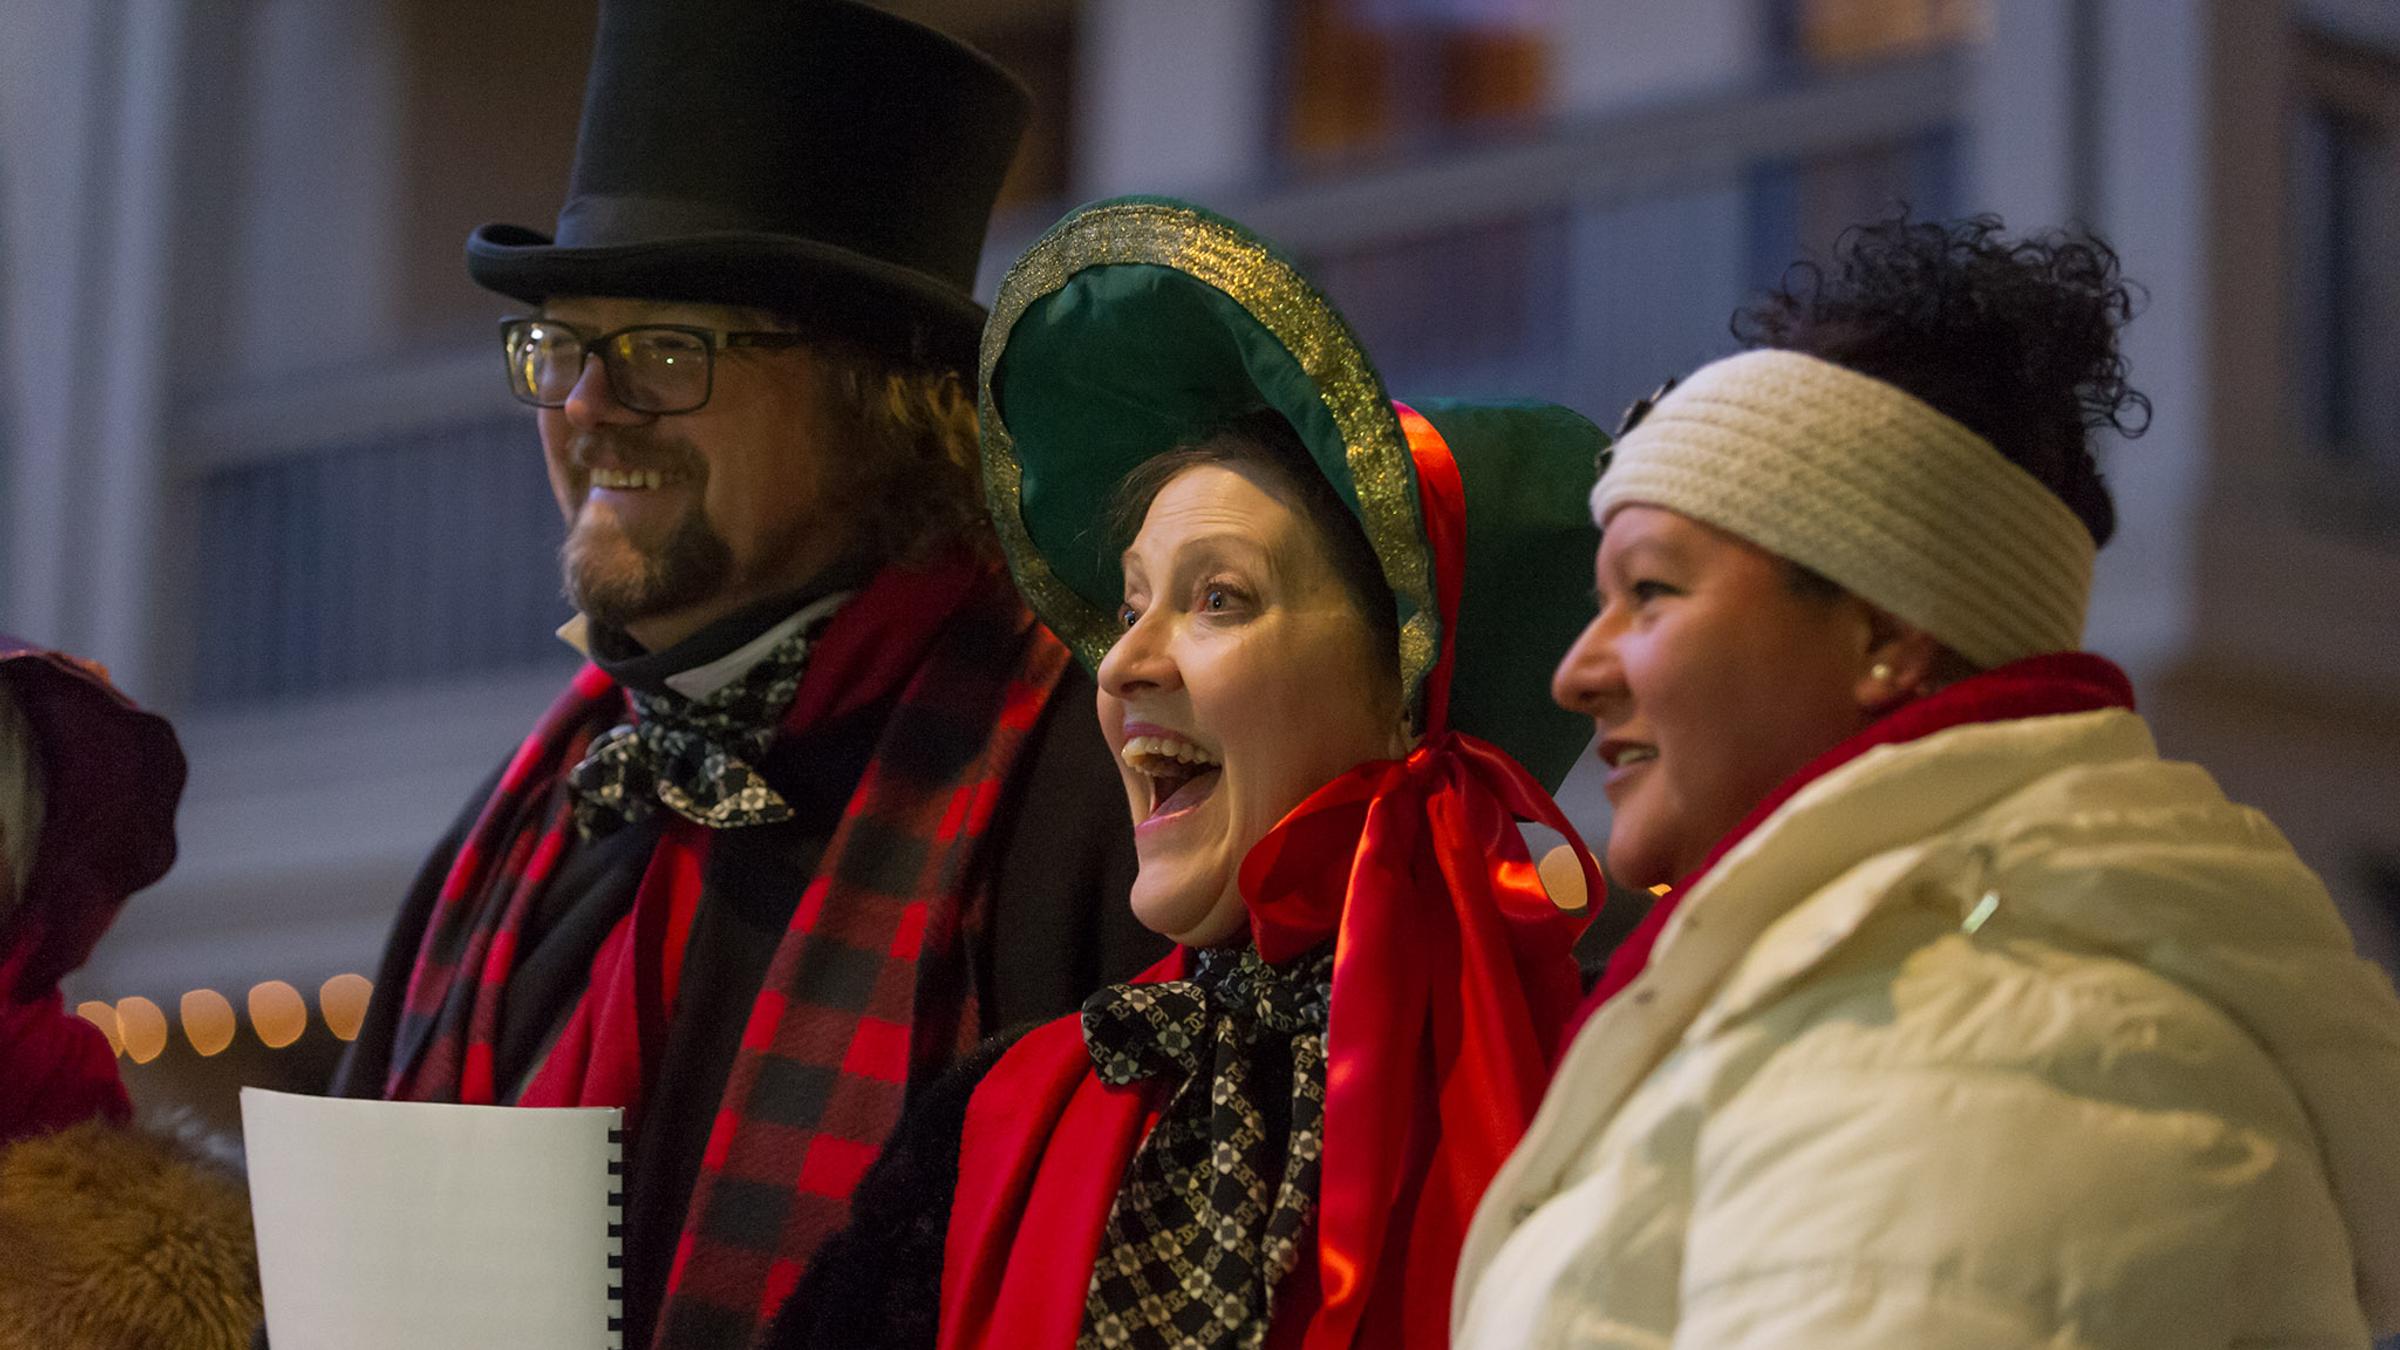 Three of the members of Great Basin Carolers sing in the Village at Palisades Tahoe